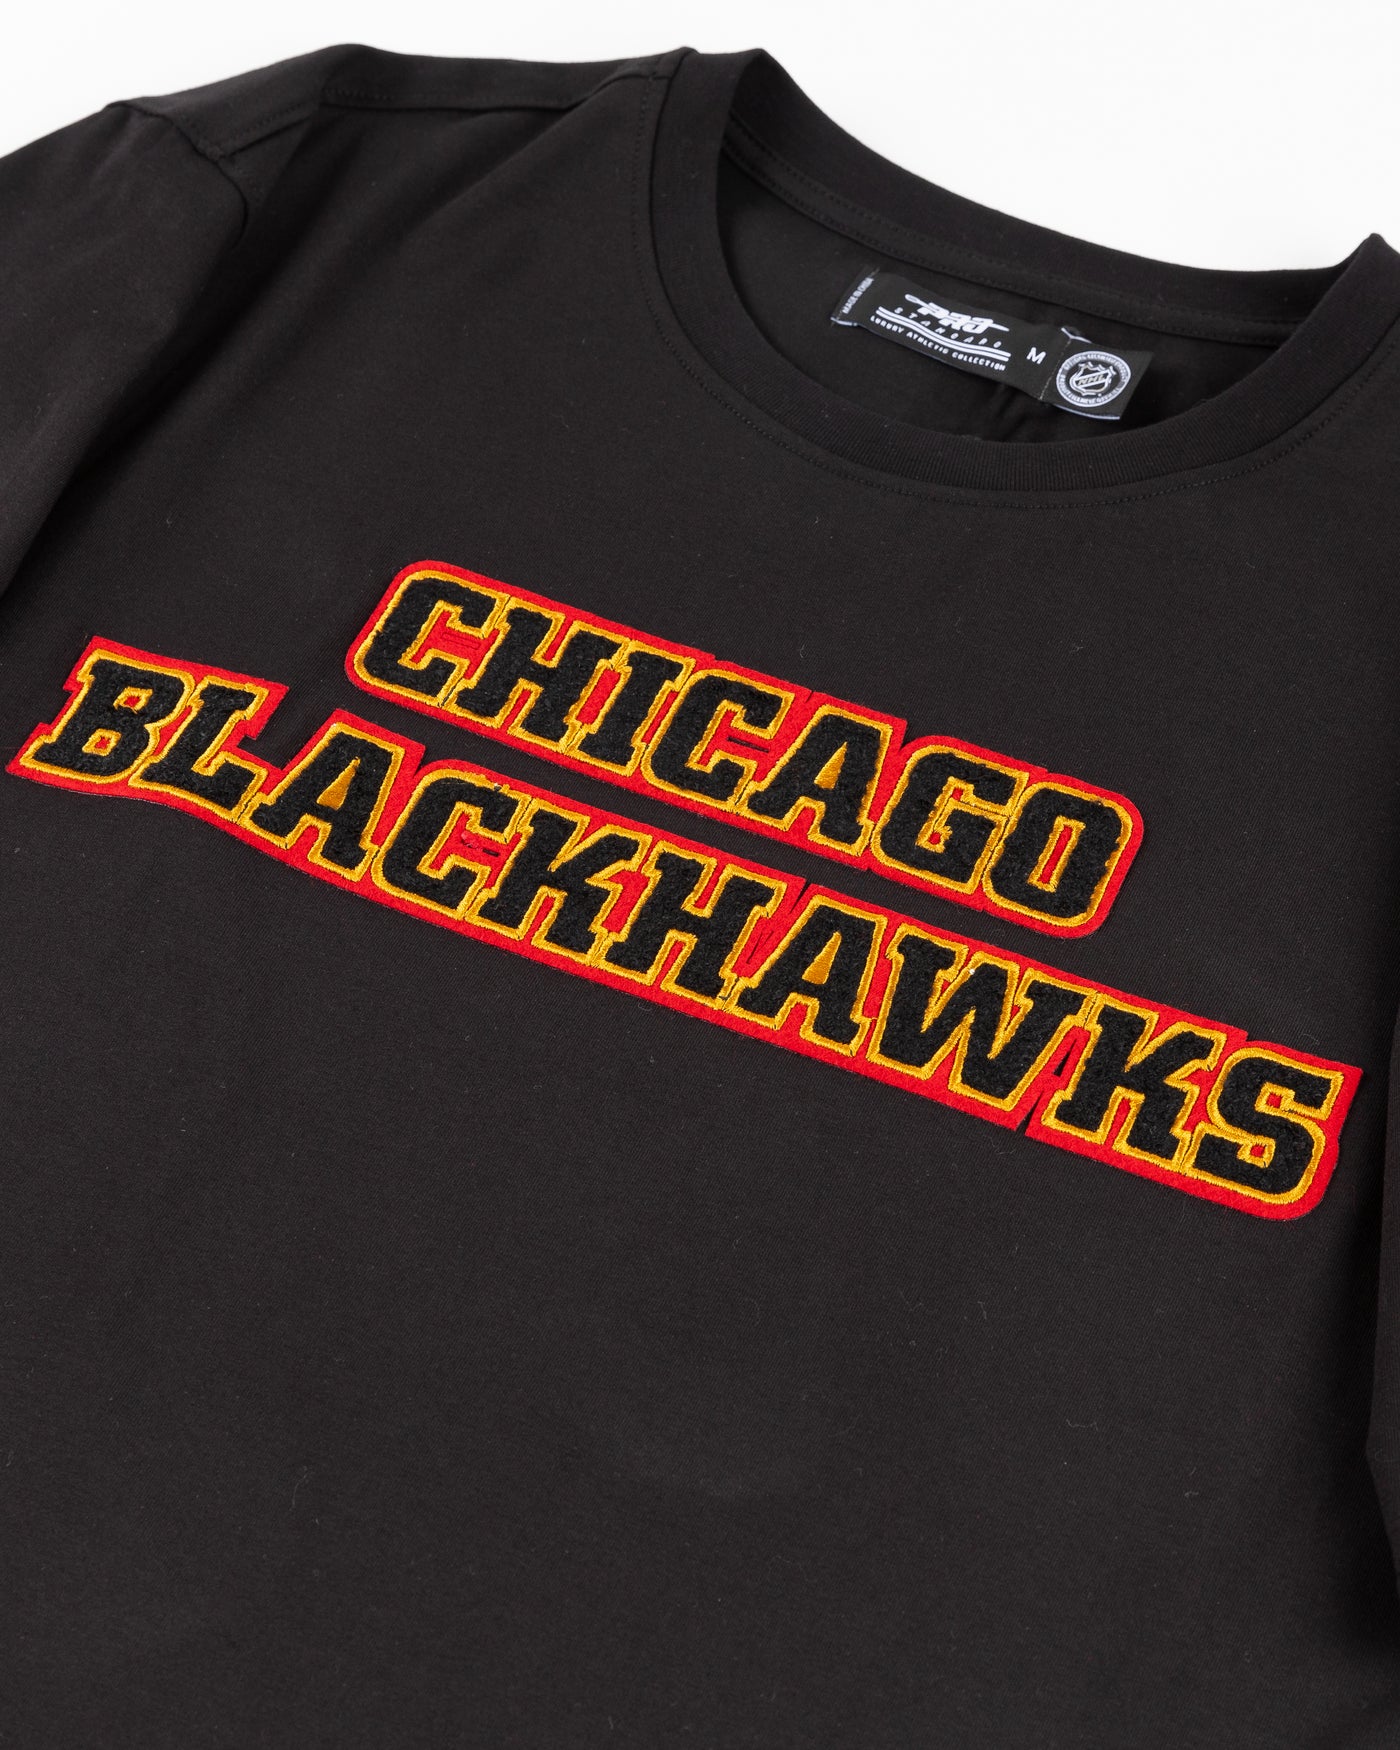 black Pro Standard tee with embroidered Chicago Blackhawks detailing on front and shoulders - front detail lay flat